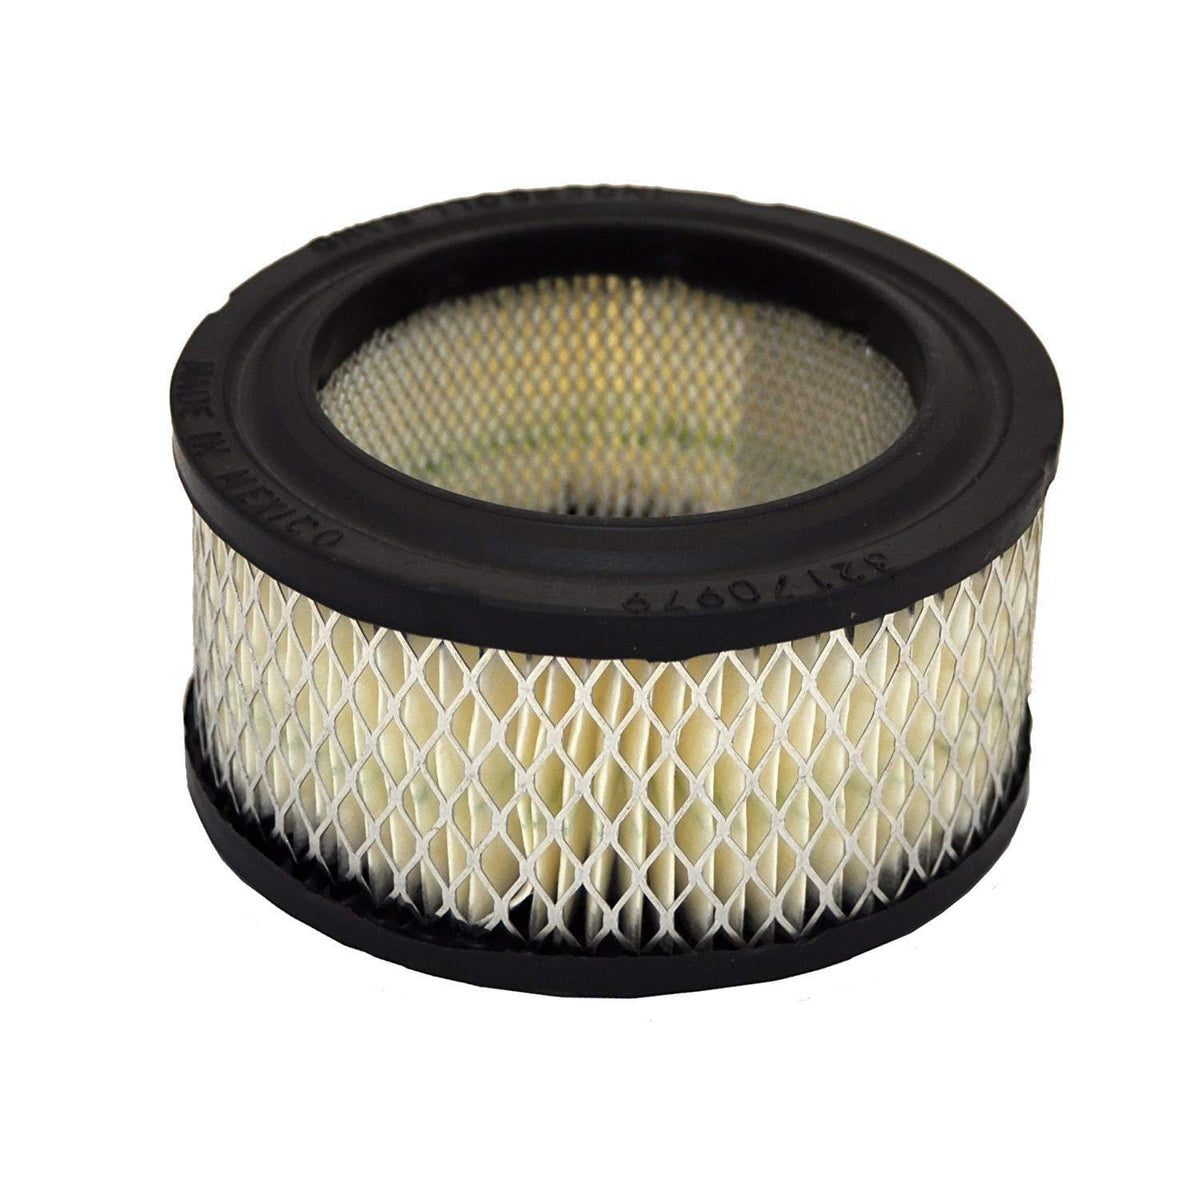  This 32170979 Air Filter Ingersoll Rand are used for SS3, SS5, 2475 models. The 32170979 Air Filter Ingersoll Rand is a replacement for many air compressor brands.